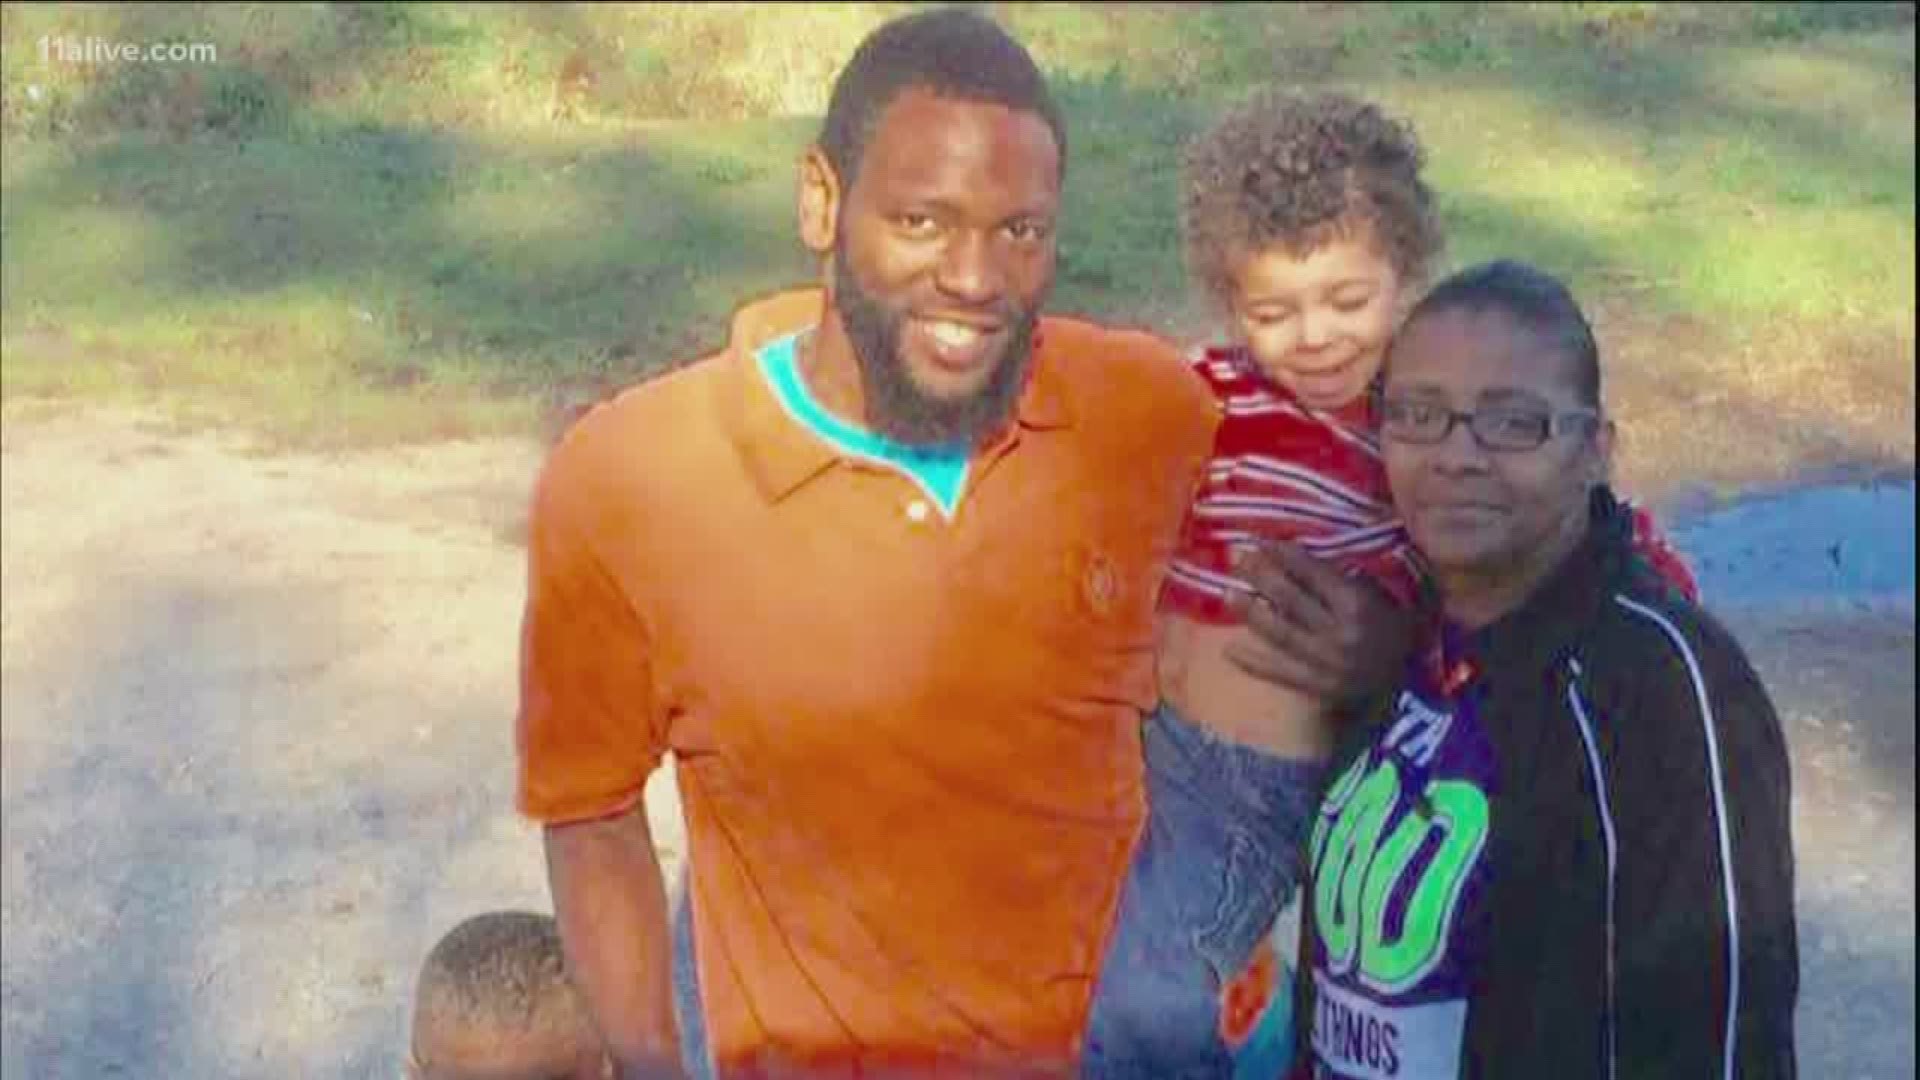 Antonio May's family is expected to announce a civil lawsuit on Wednesday.